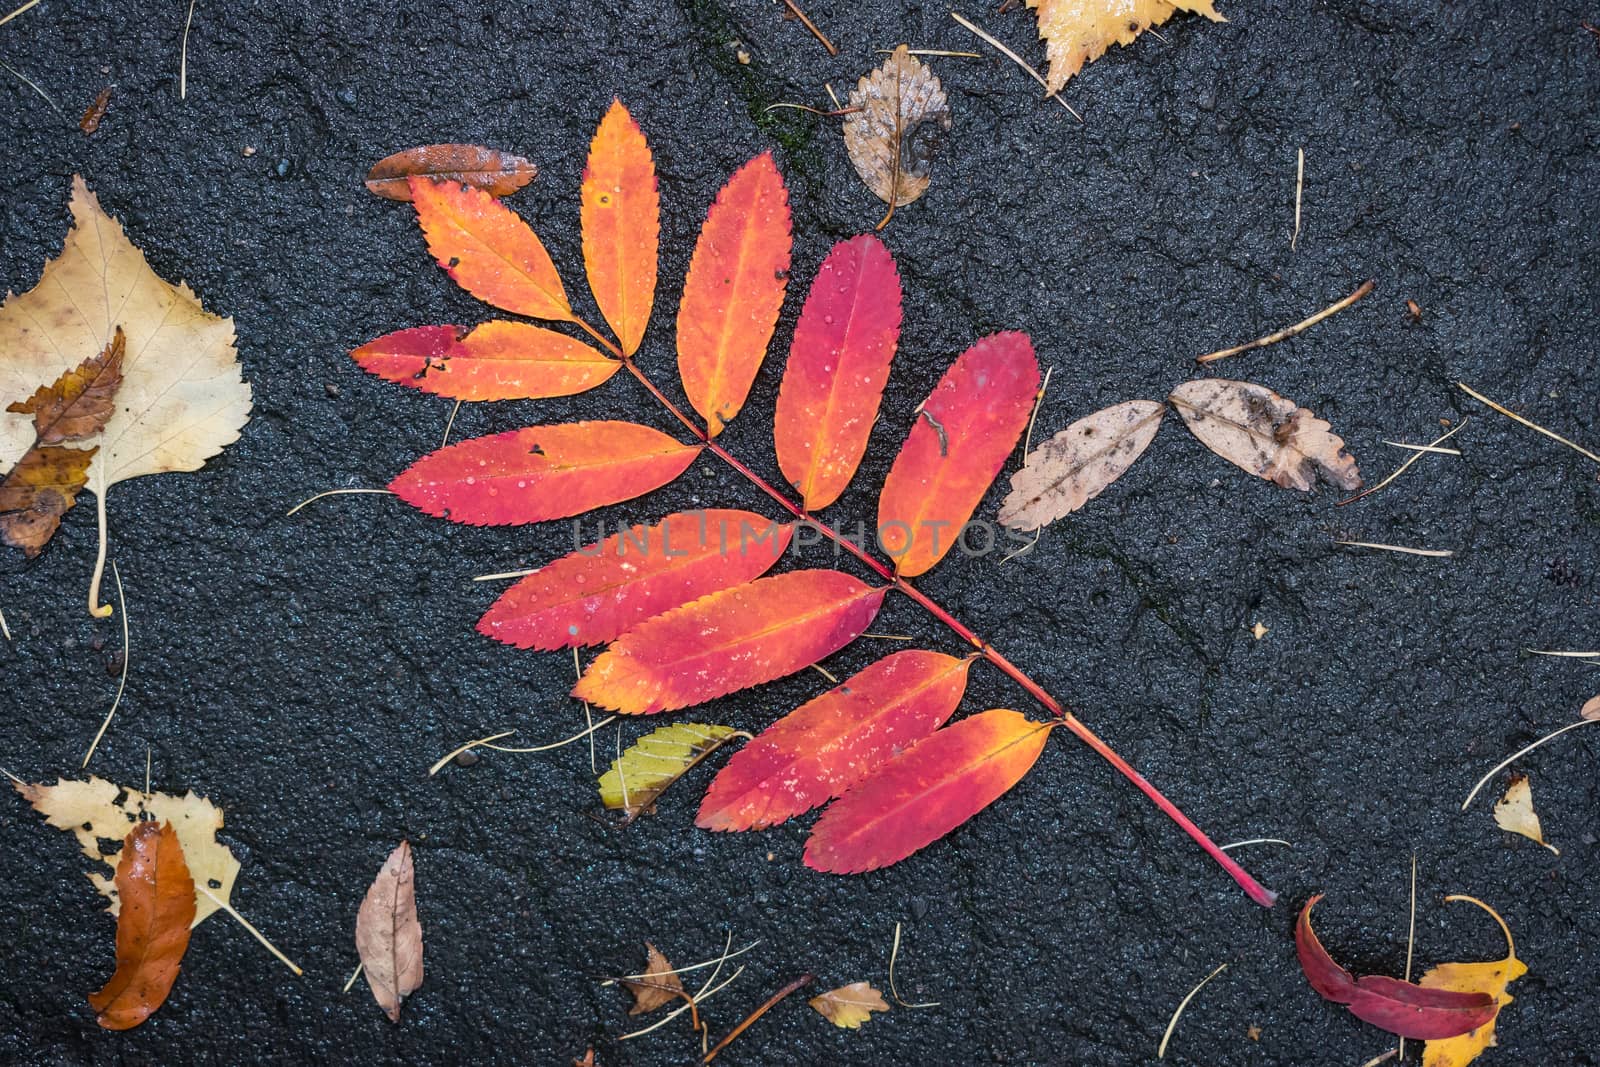 Fallen autumn leaves of red mountain ash lie on the wet asphalt after the rain